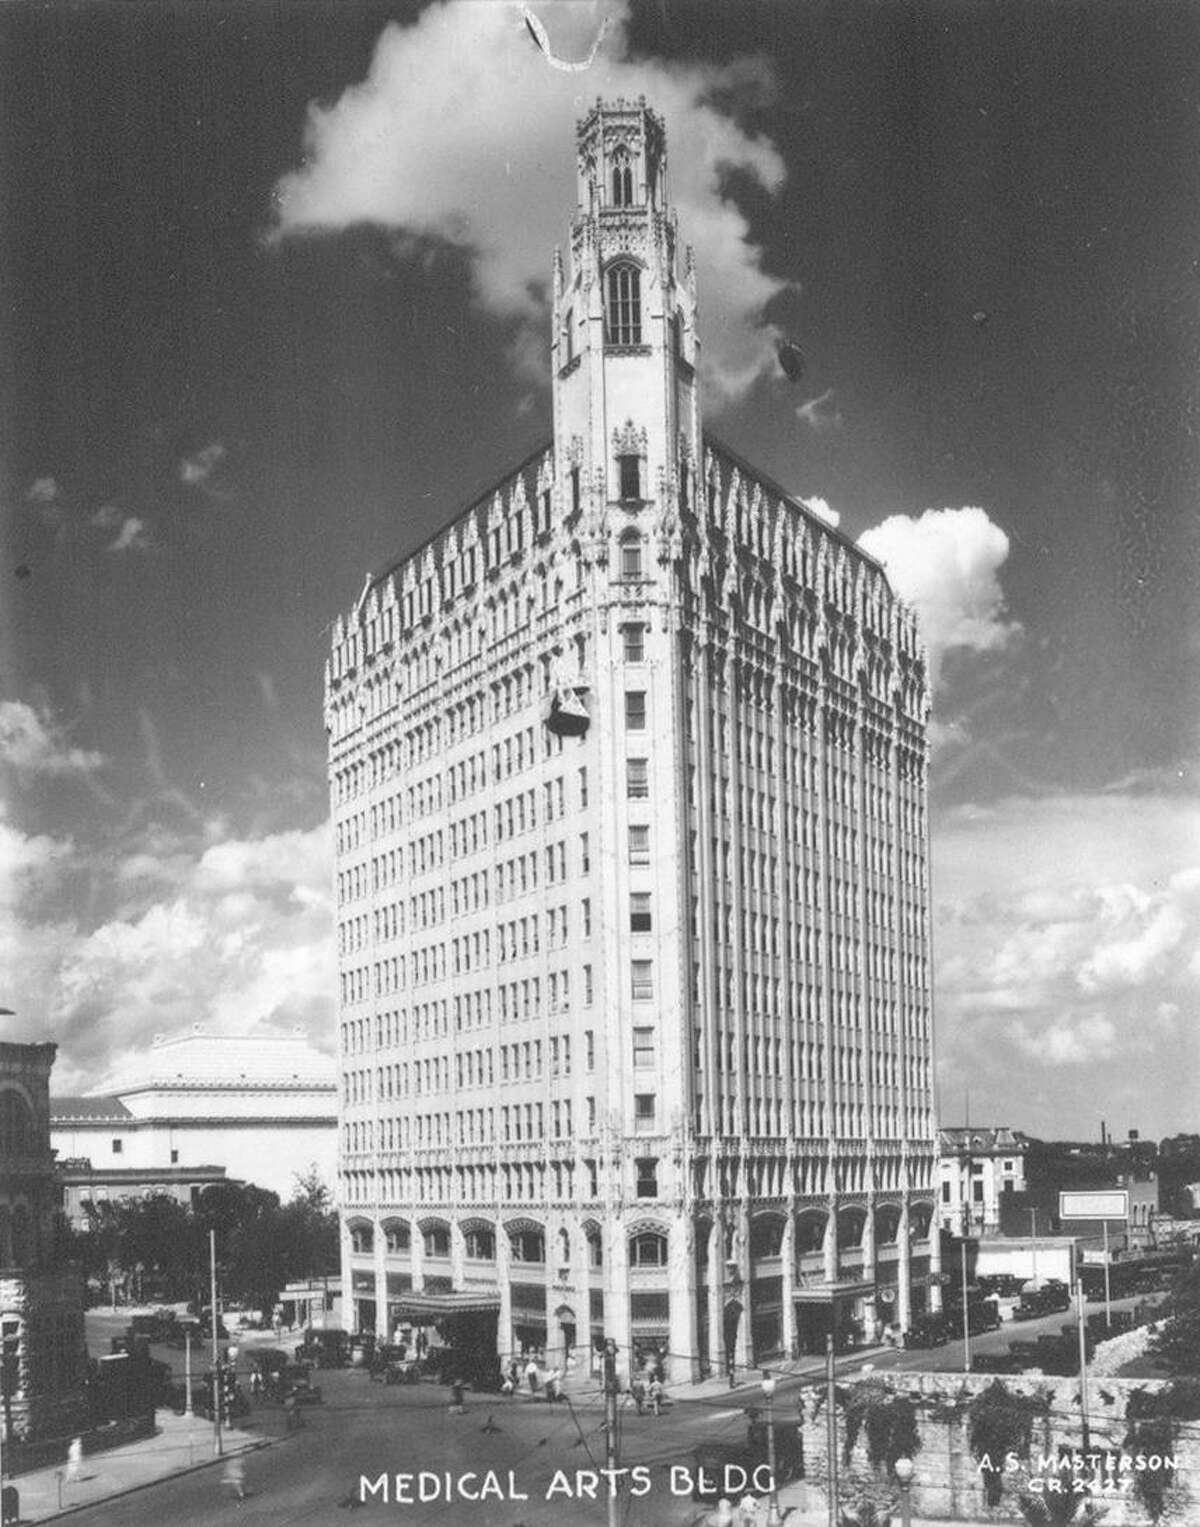 The Medical Arts Building, now the Emily Morgan Hotel, is shown in this c. 1928 photo.